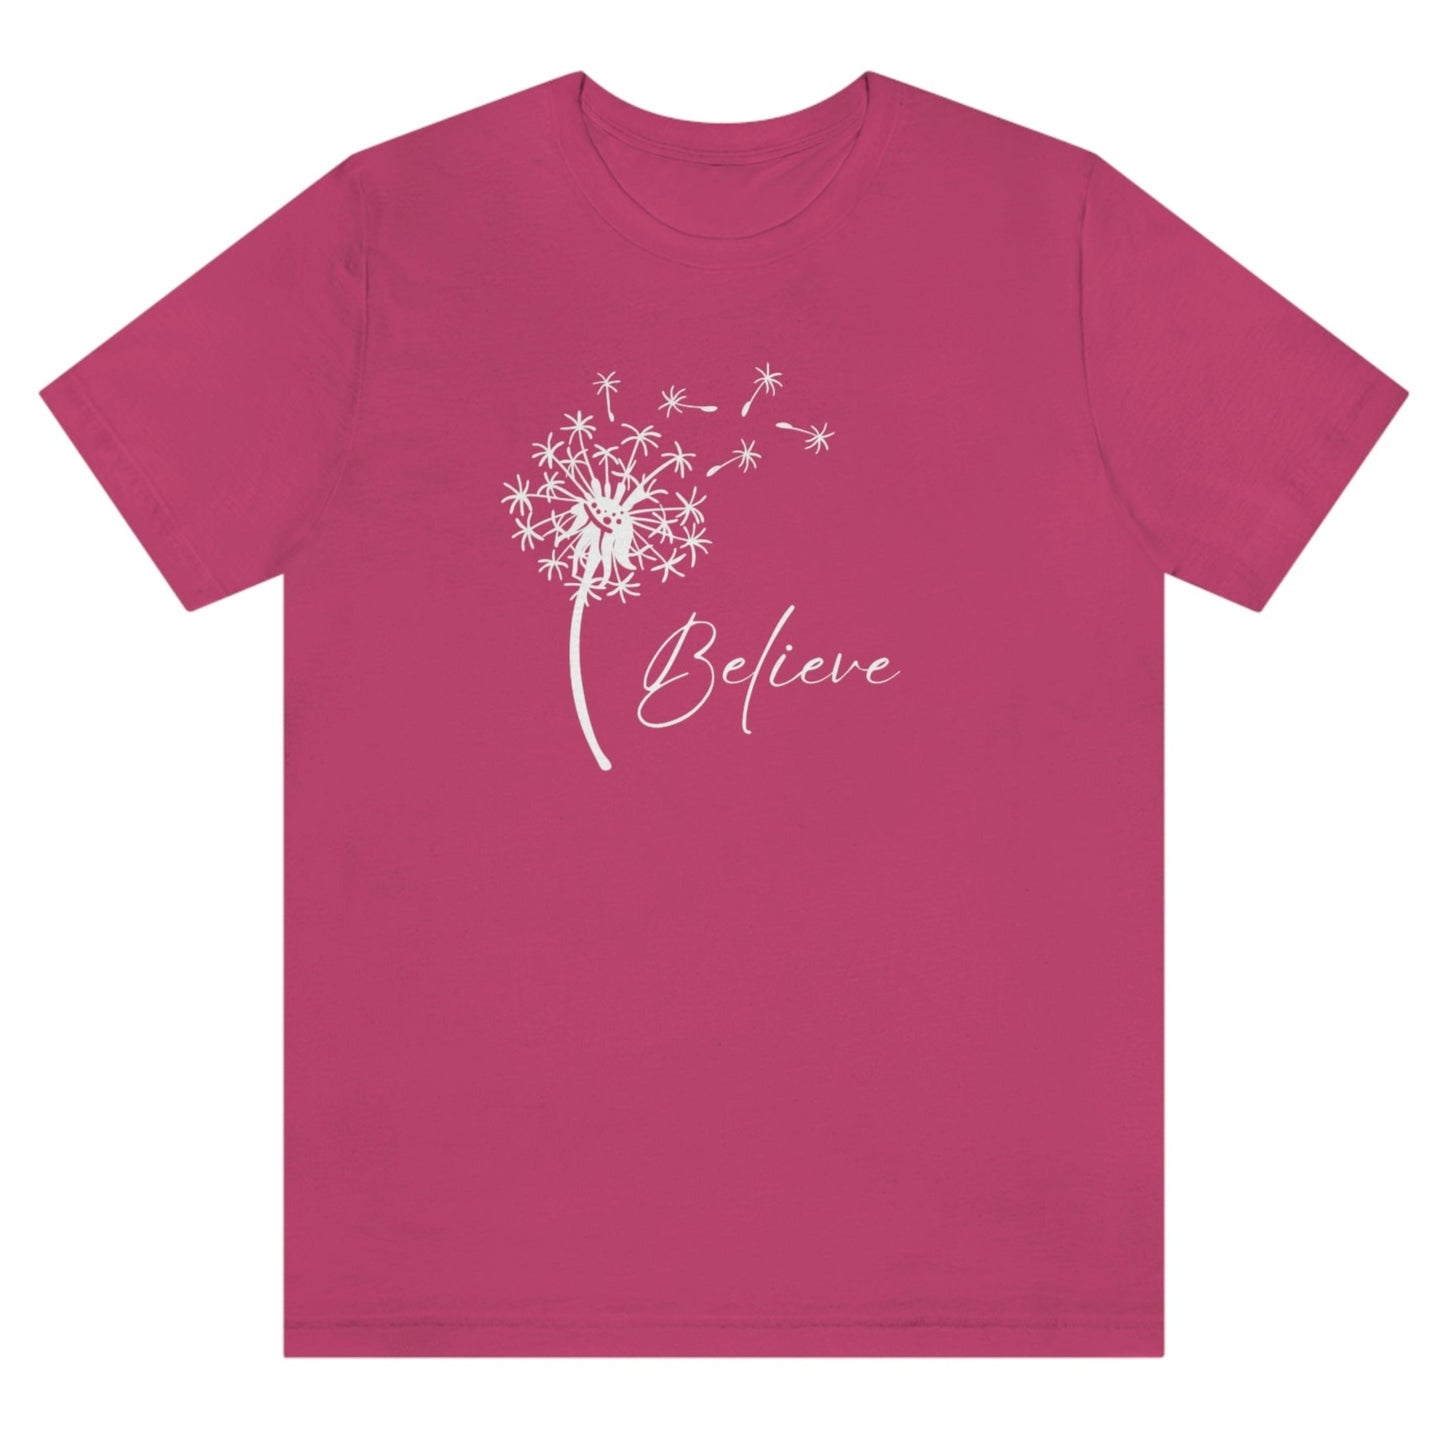 believe-with-dandelion-wishes-berry-t-shirt-womens-inspiring